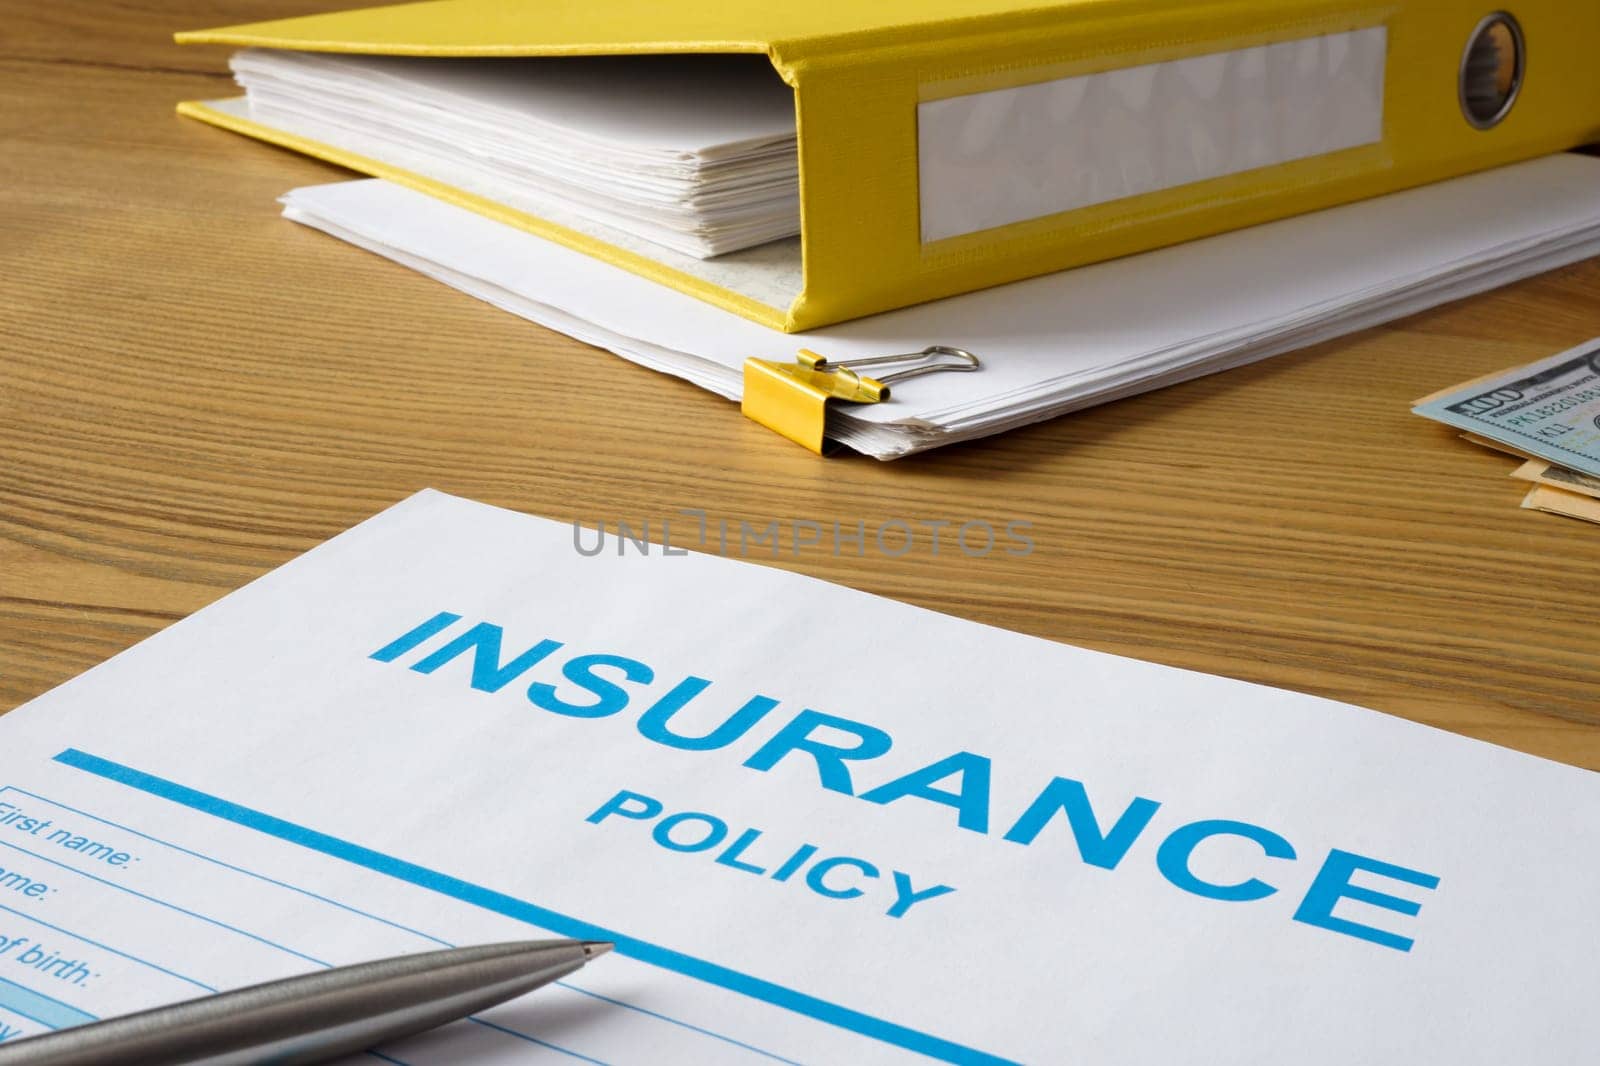 Insurance policy with pen and a folder.